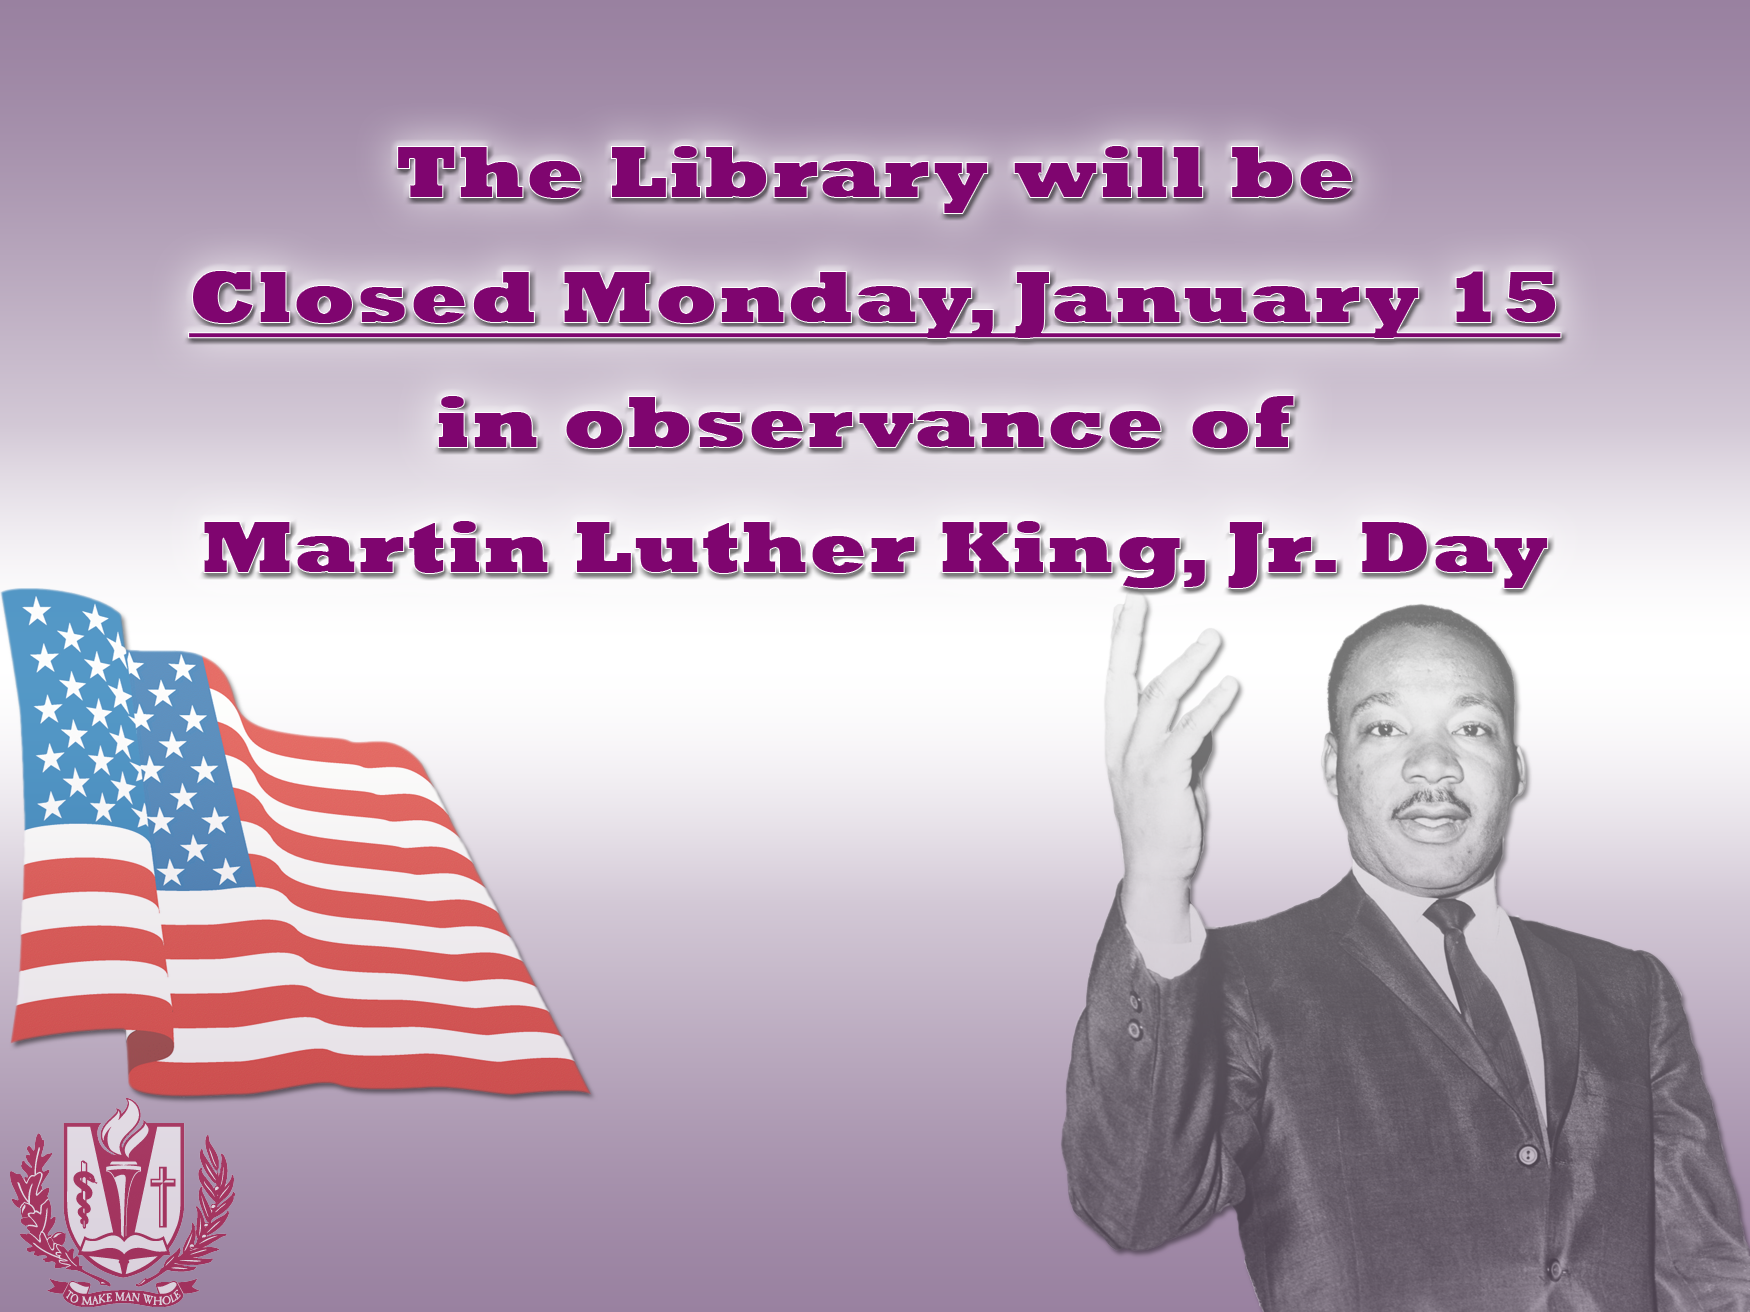 The library will be closed on Monday, January 15 in observance of Martin Luther King, Jr. Day.  